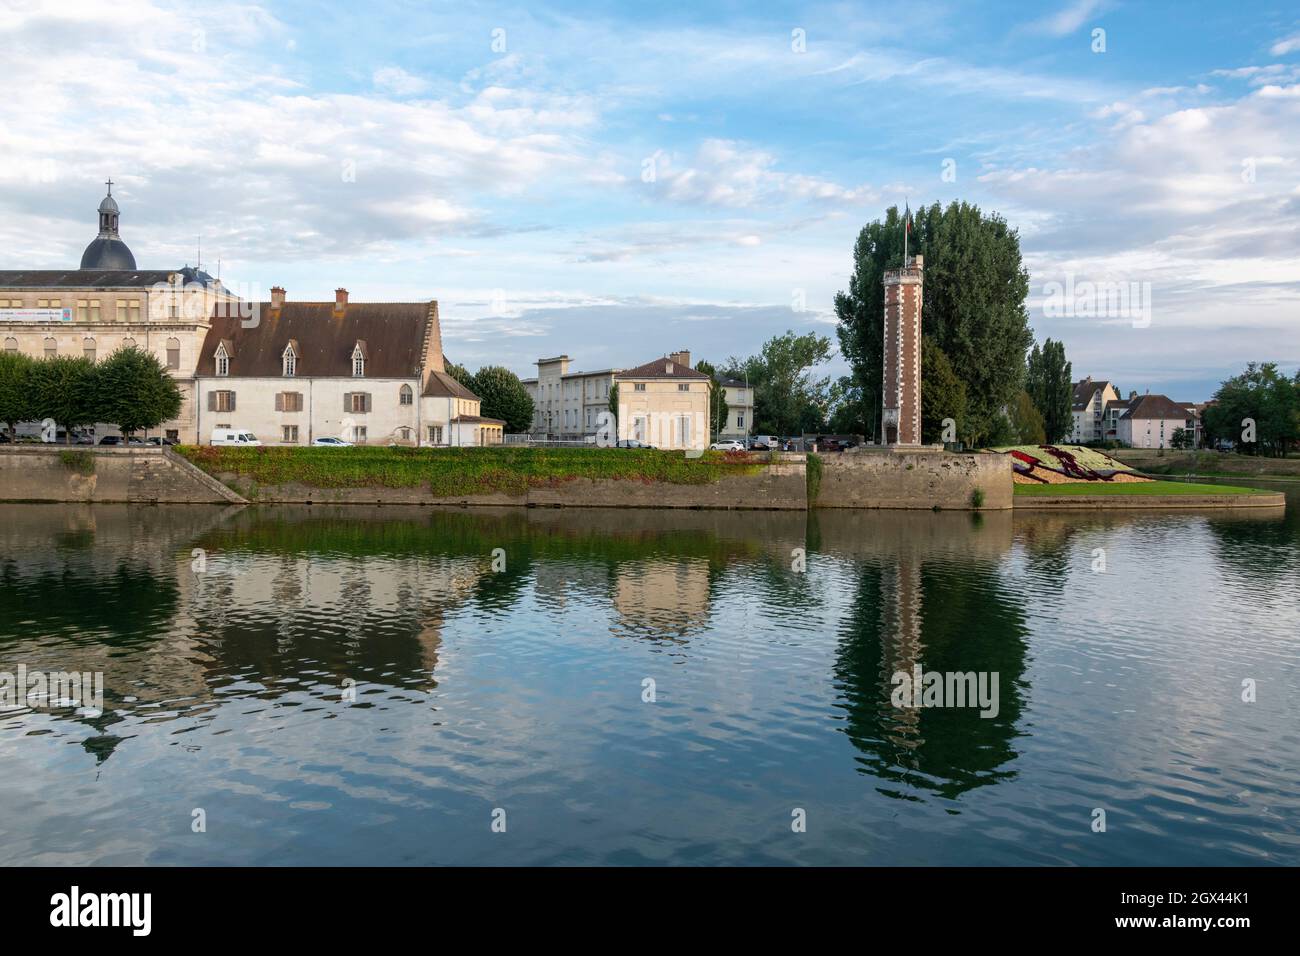 The Ancient Saint Laurent Hospital and Deanery Tower on the Island Saint Laurent in the River Saone at Chalon-sur-Saône, Eastern France. Stock Photo